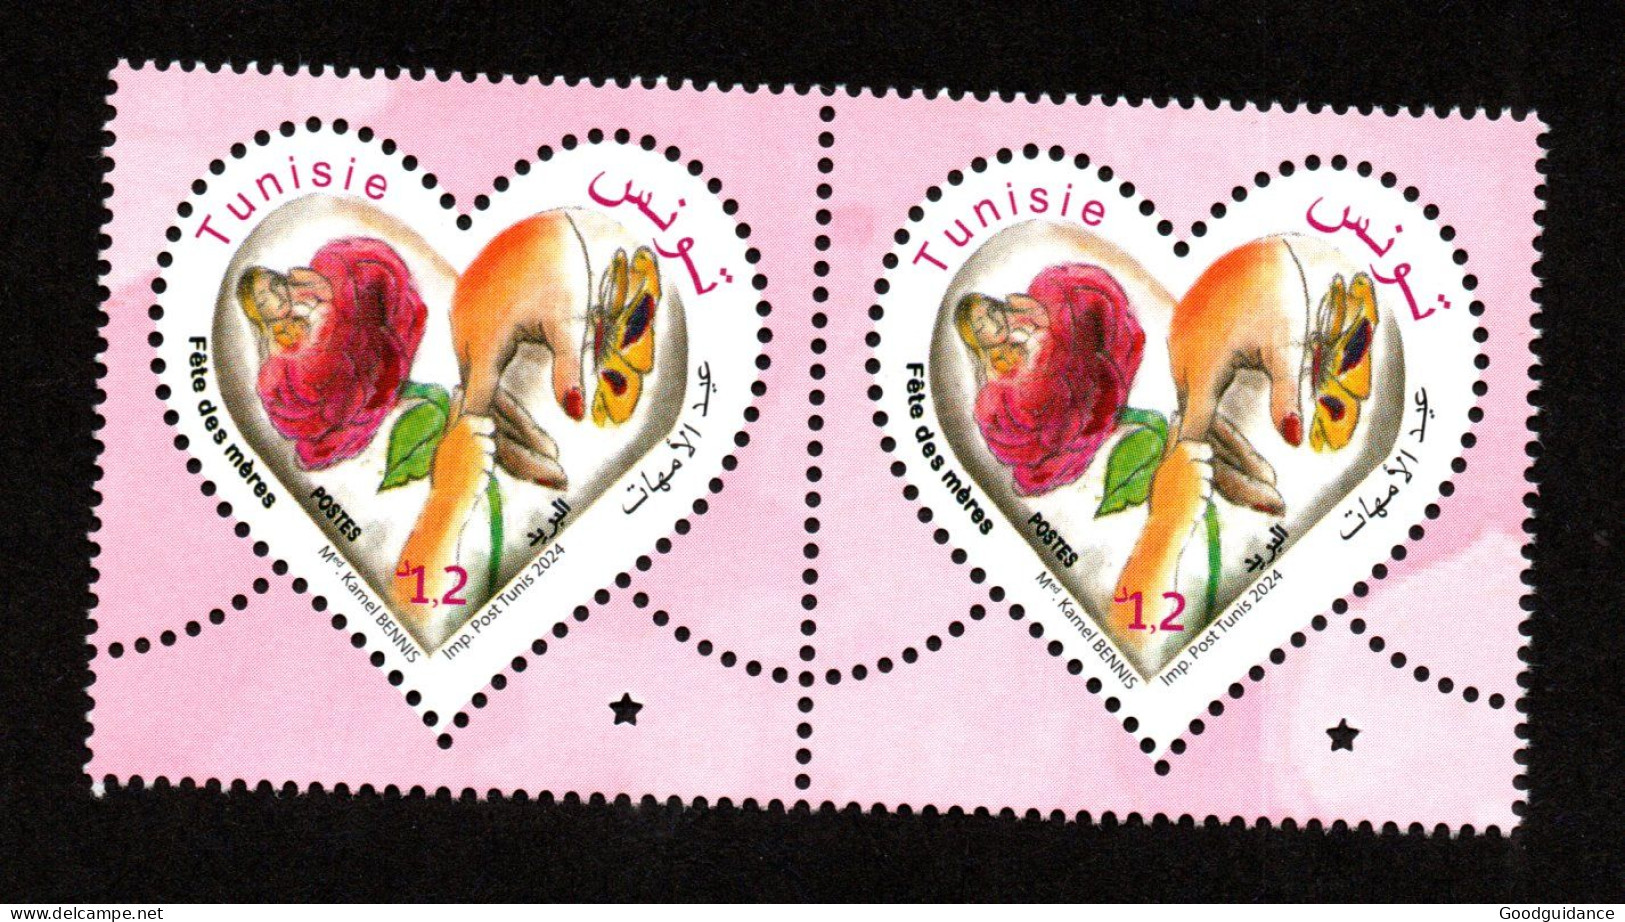 2024 - Tunisia - Mother's Day - Woman- Children- Rose- Butterfly- Hand- Love - Pair - Complete Set 1v.MNH** - Tunisia (1956-...)